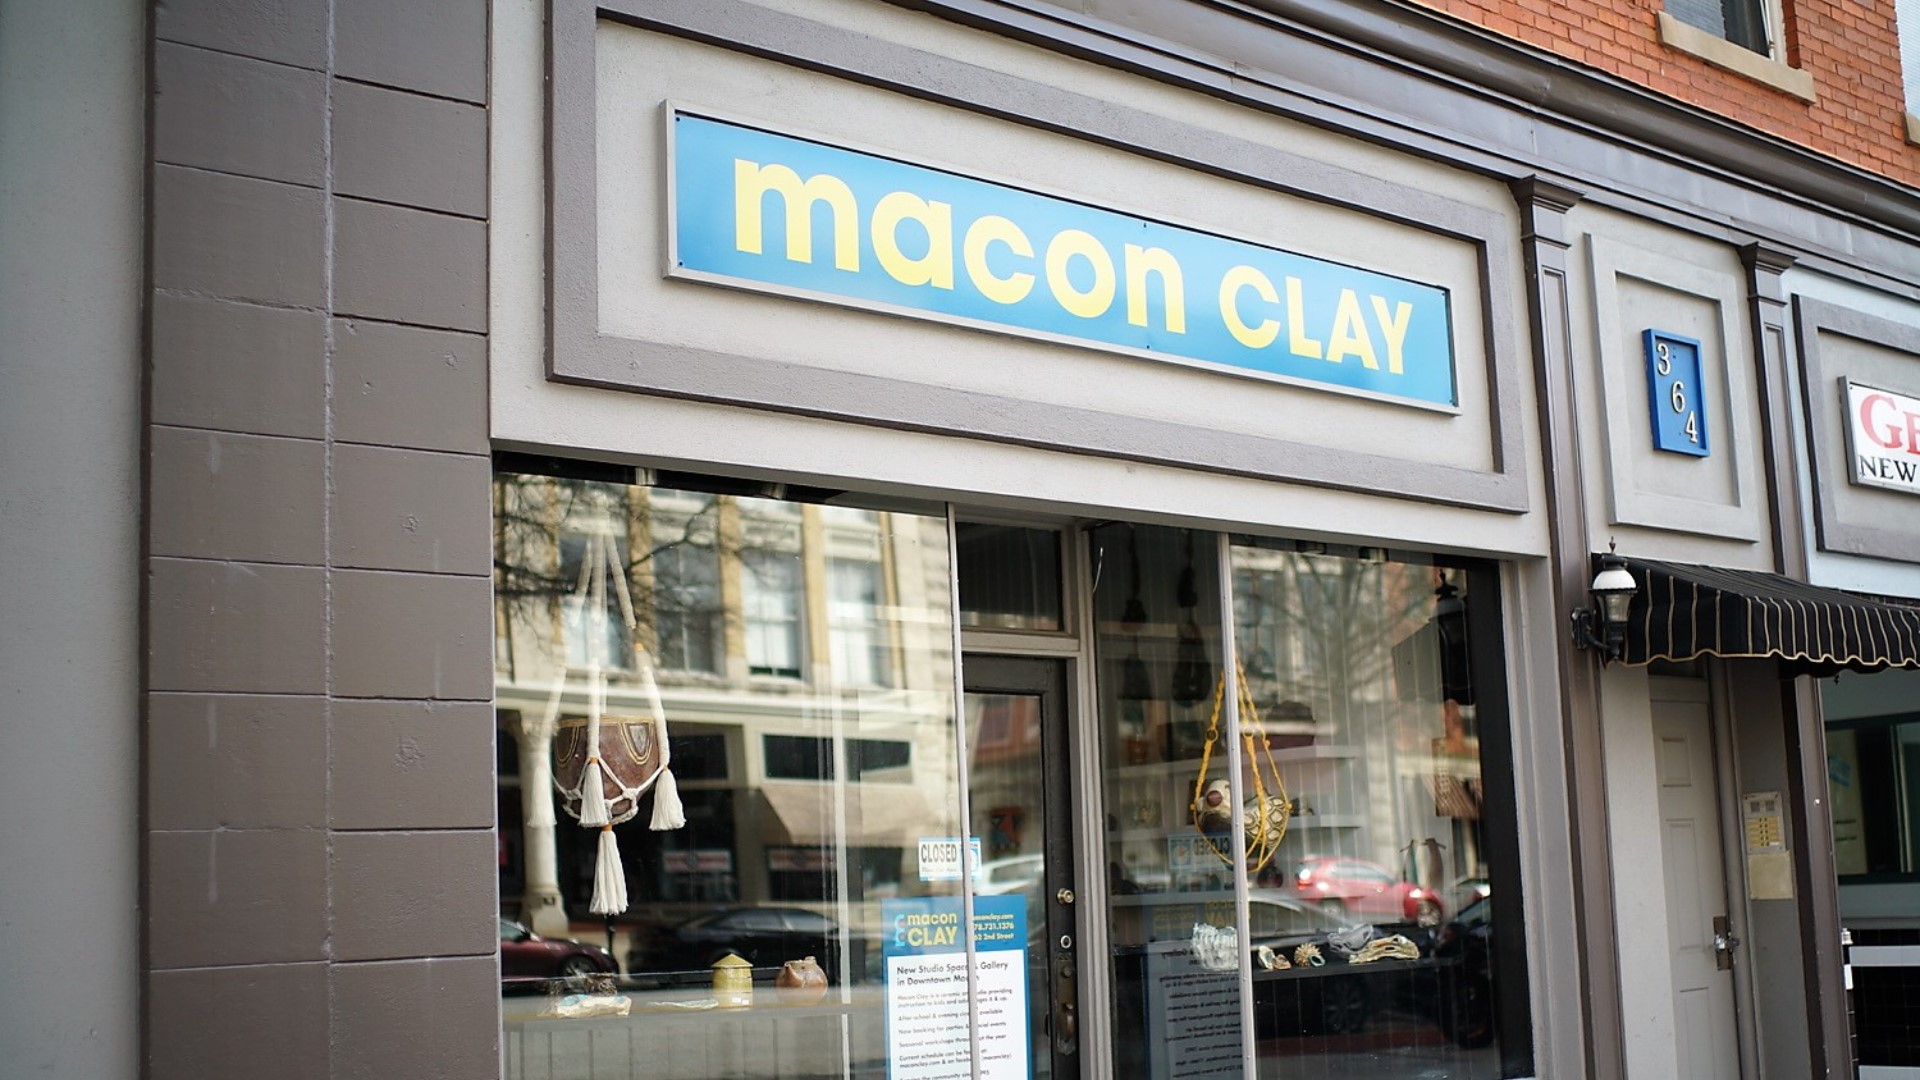 Macon Clay is a new teaching studio and gallery space on 2nd Street in downtown Macon